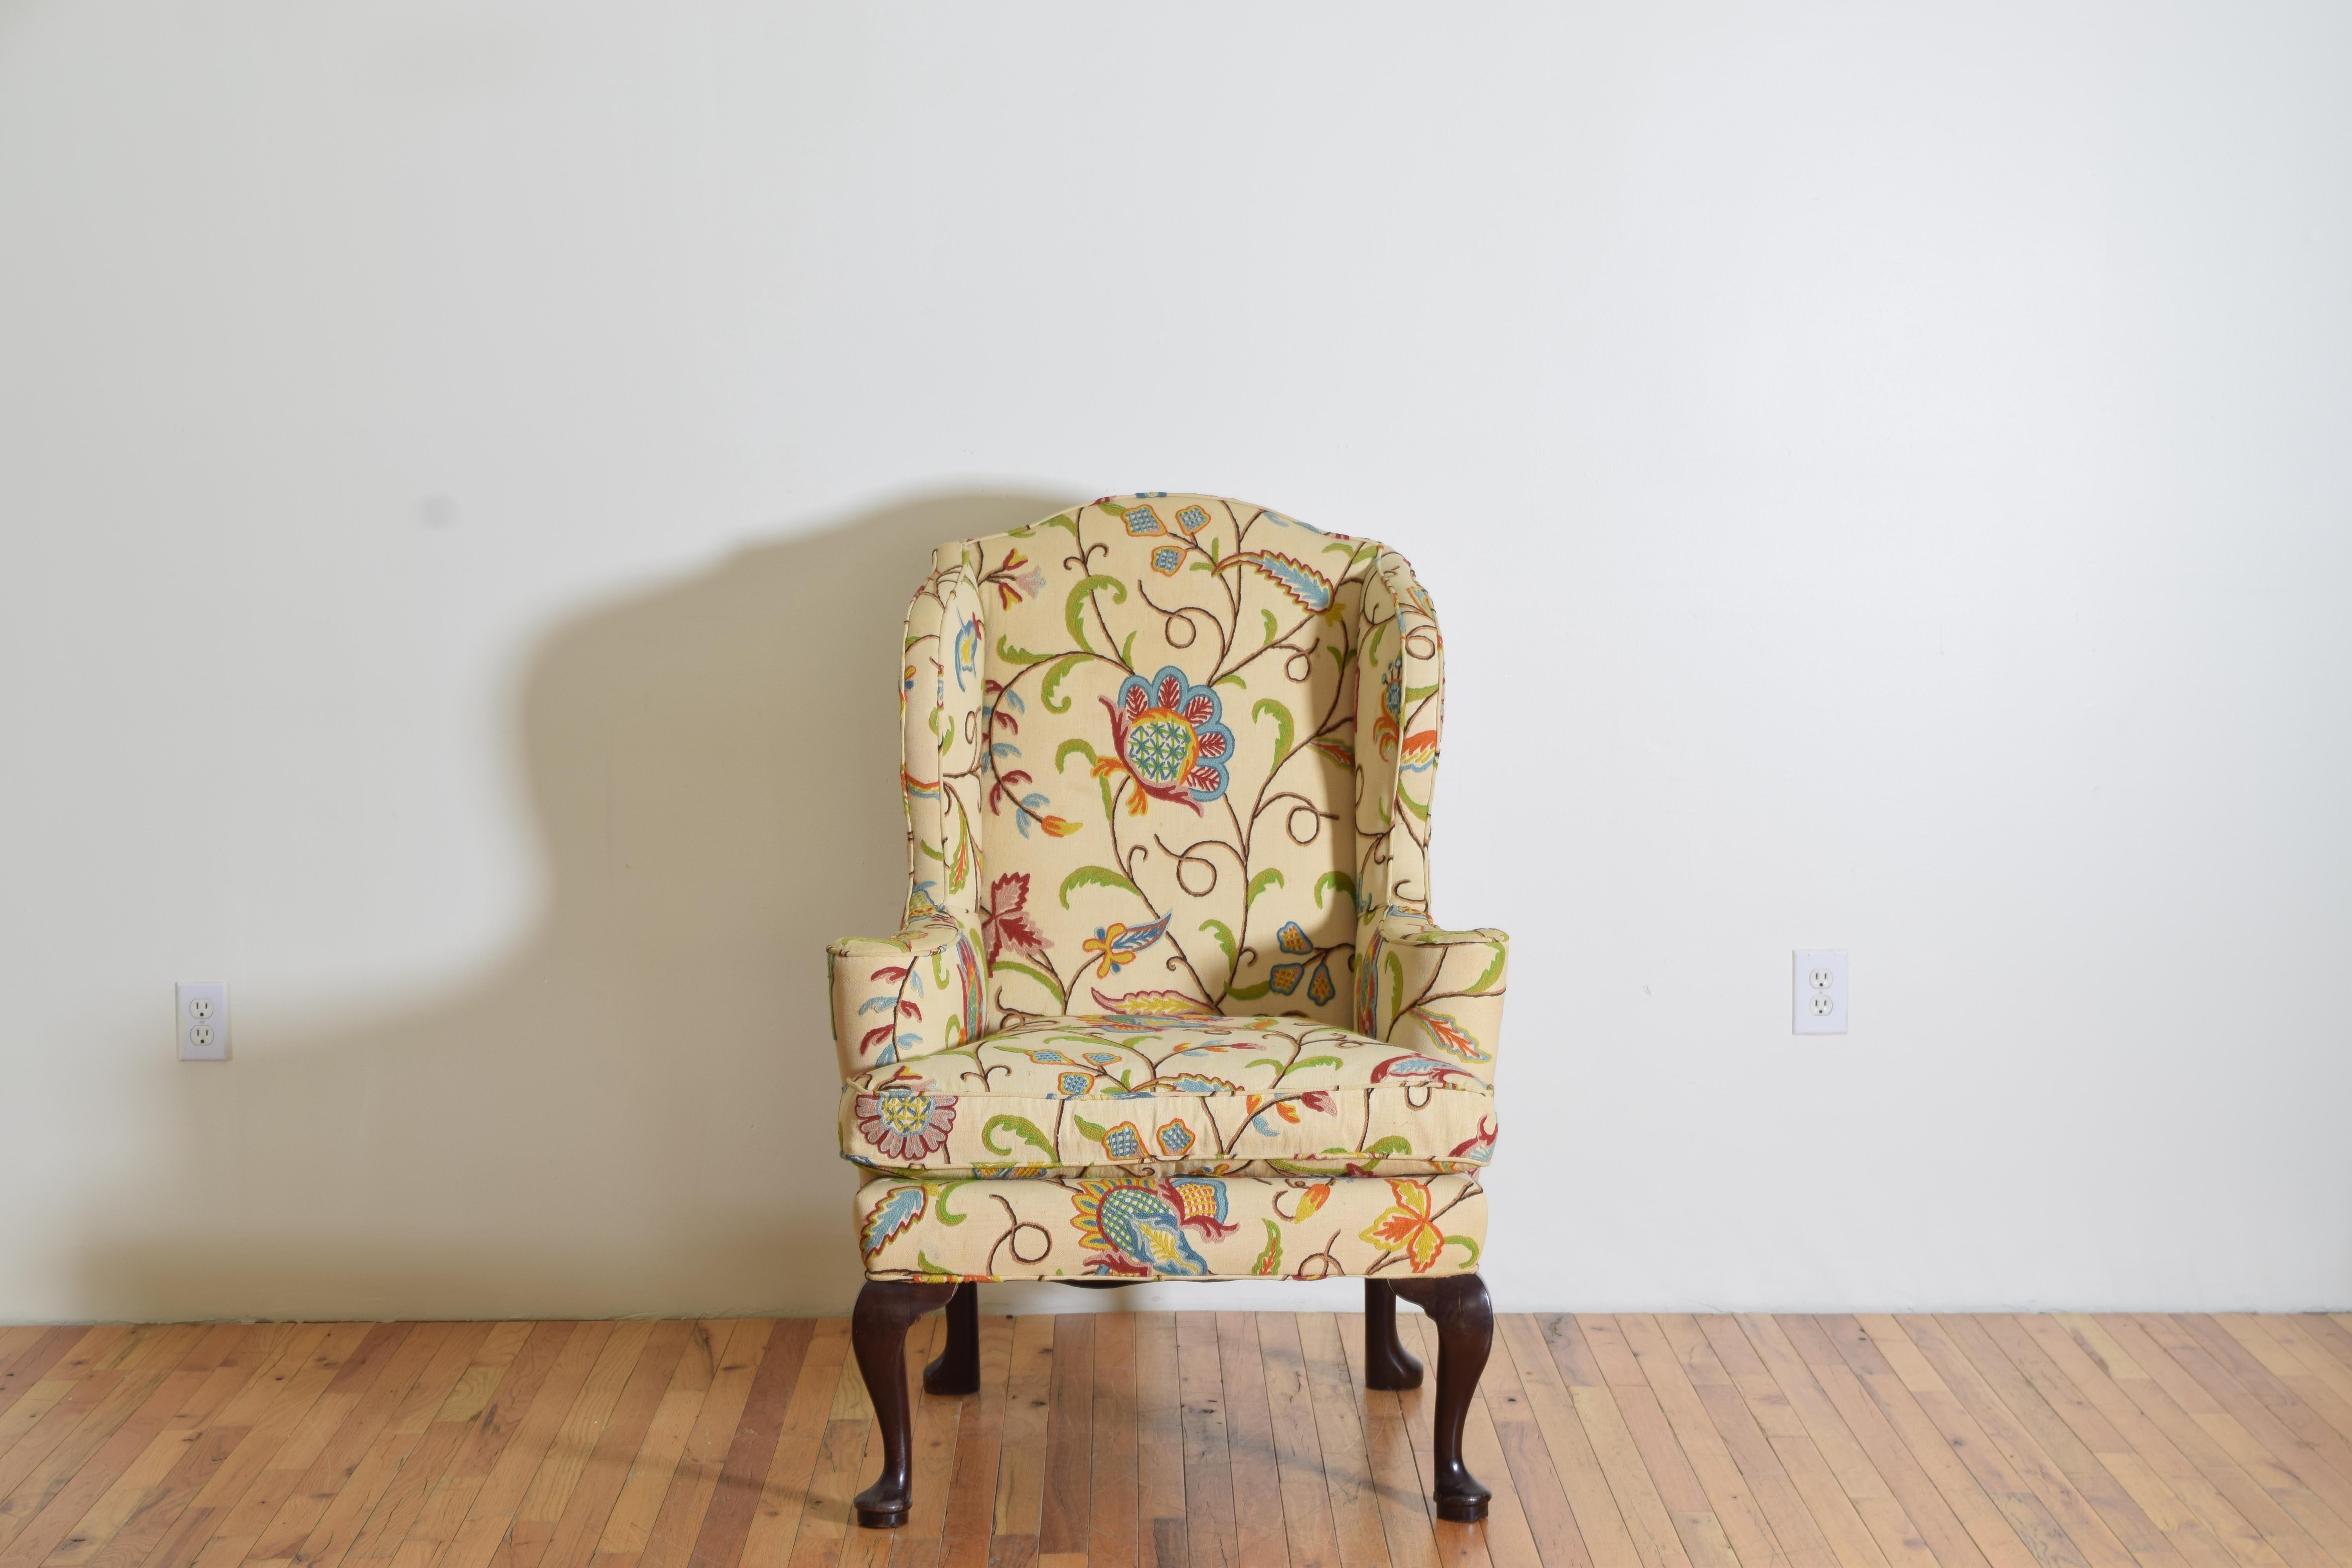 20th Century English Mahogany Queen Anne Style Crewel Work Upholstered Wingchair, ca. 1900